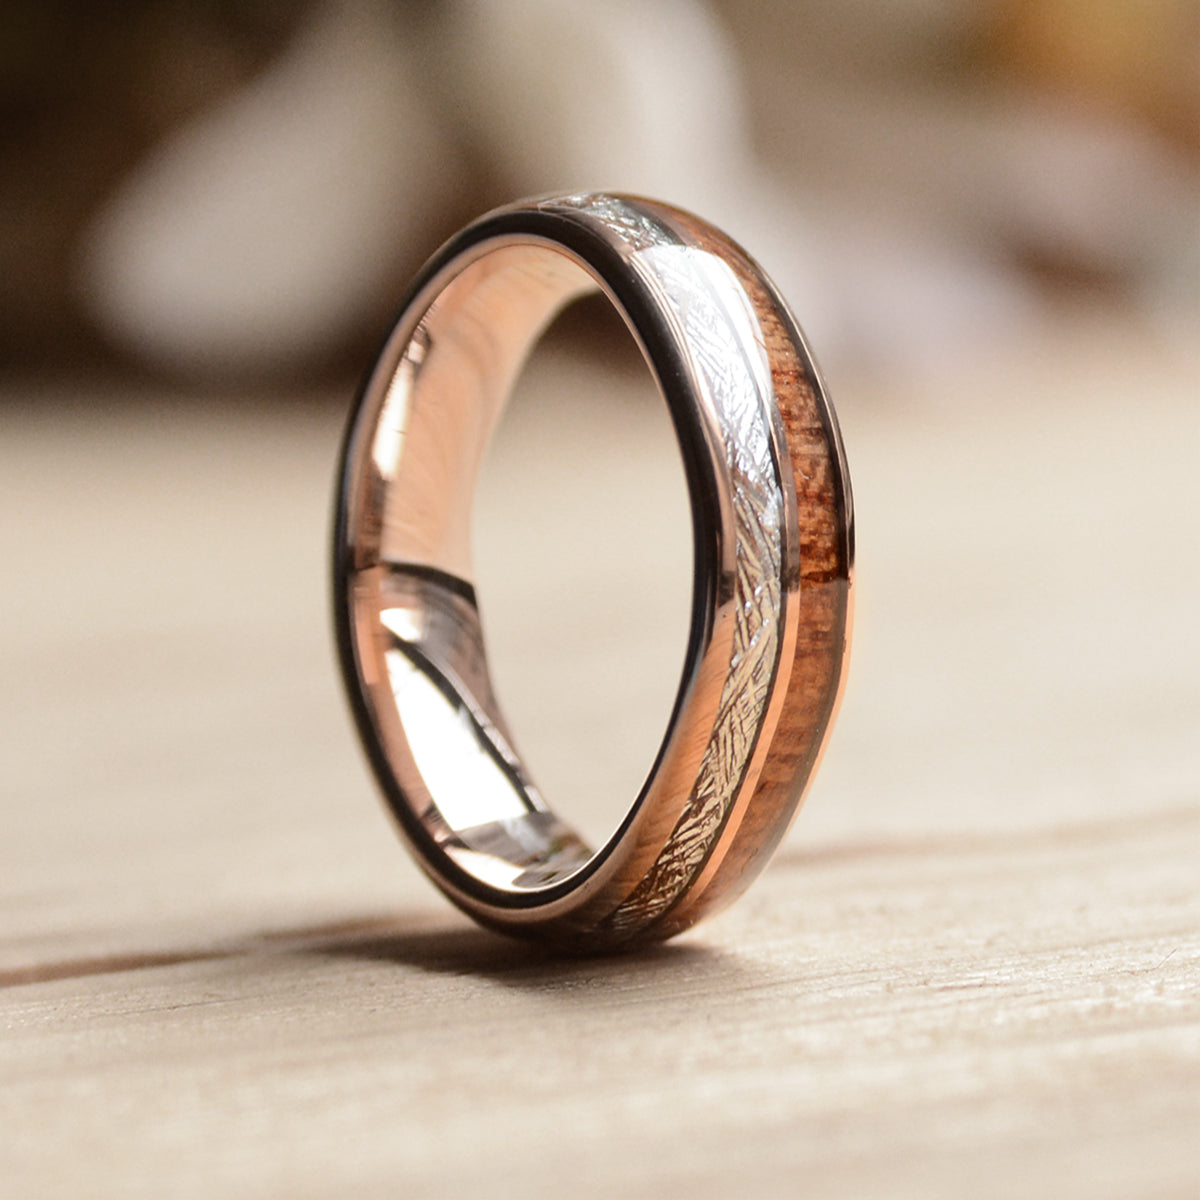 Wood Wedding Band for Women - 6mm Rose Gold Plated Tungsten Ring with Meteorite and Wood Inlay, Wedding Rings for Women, Women's Engagement Rings 6